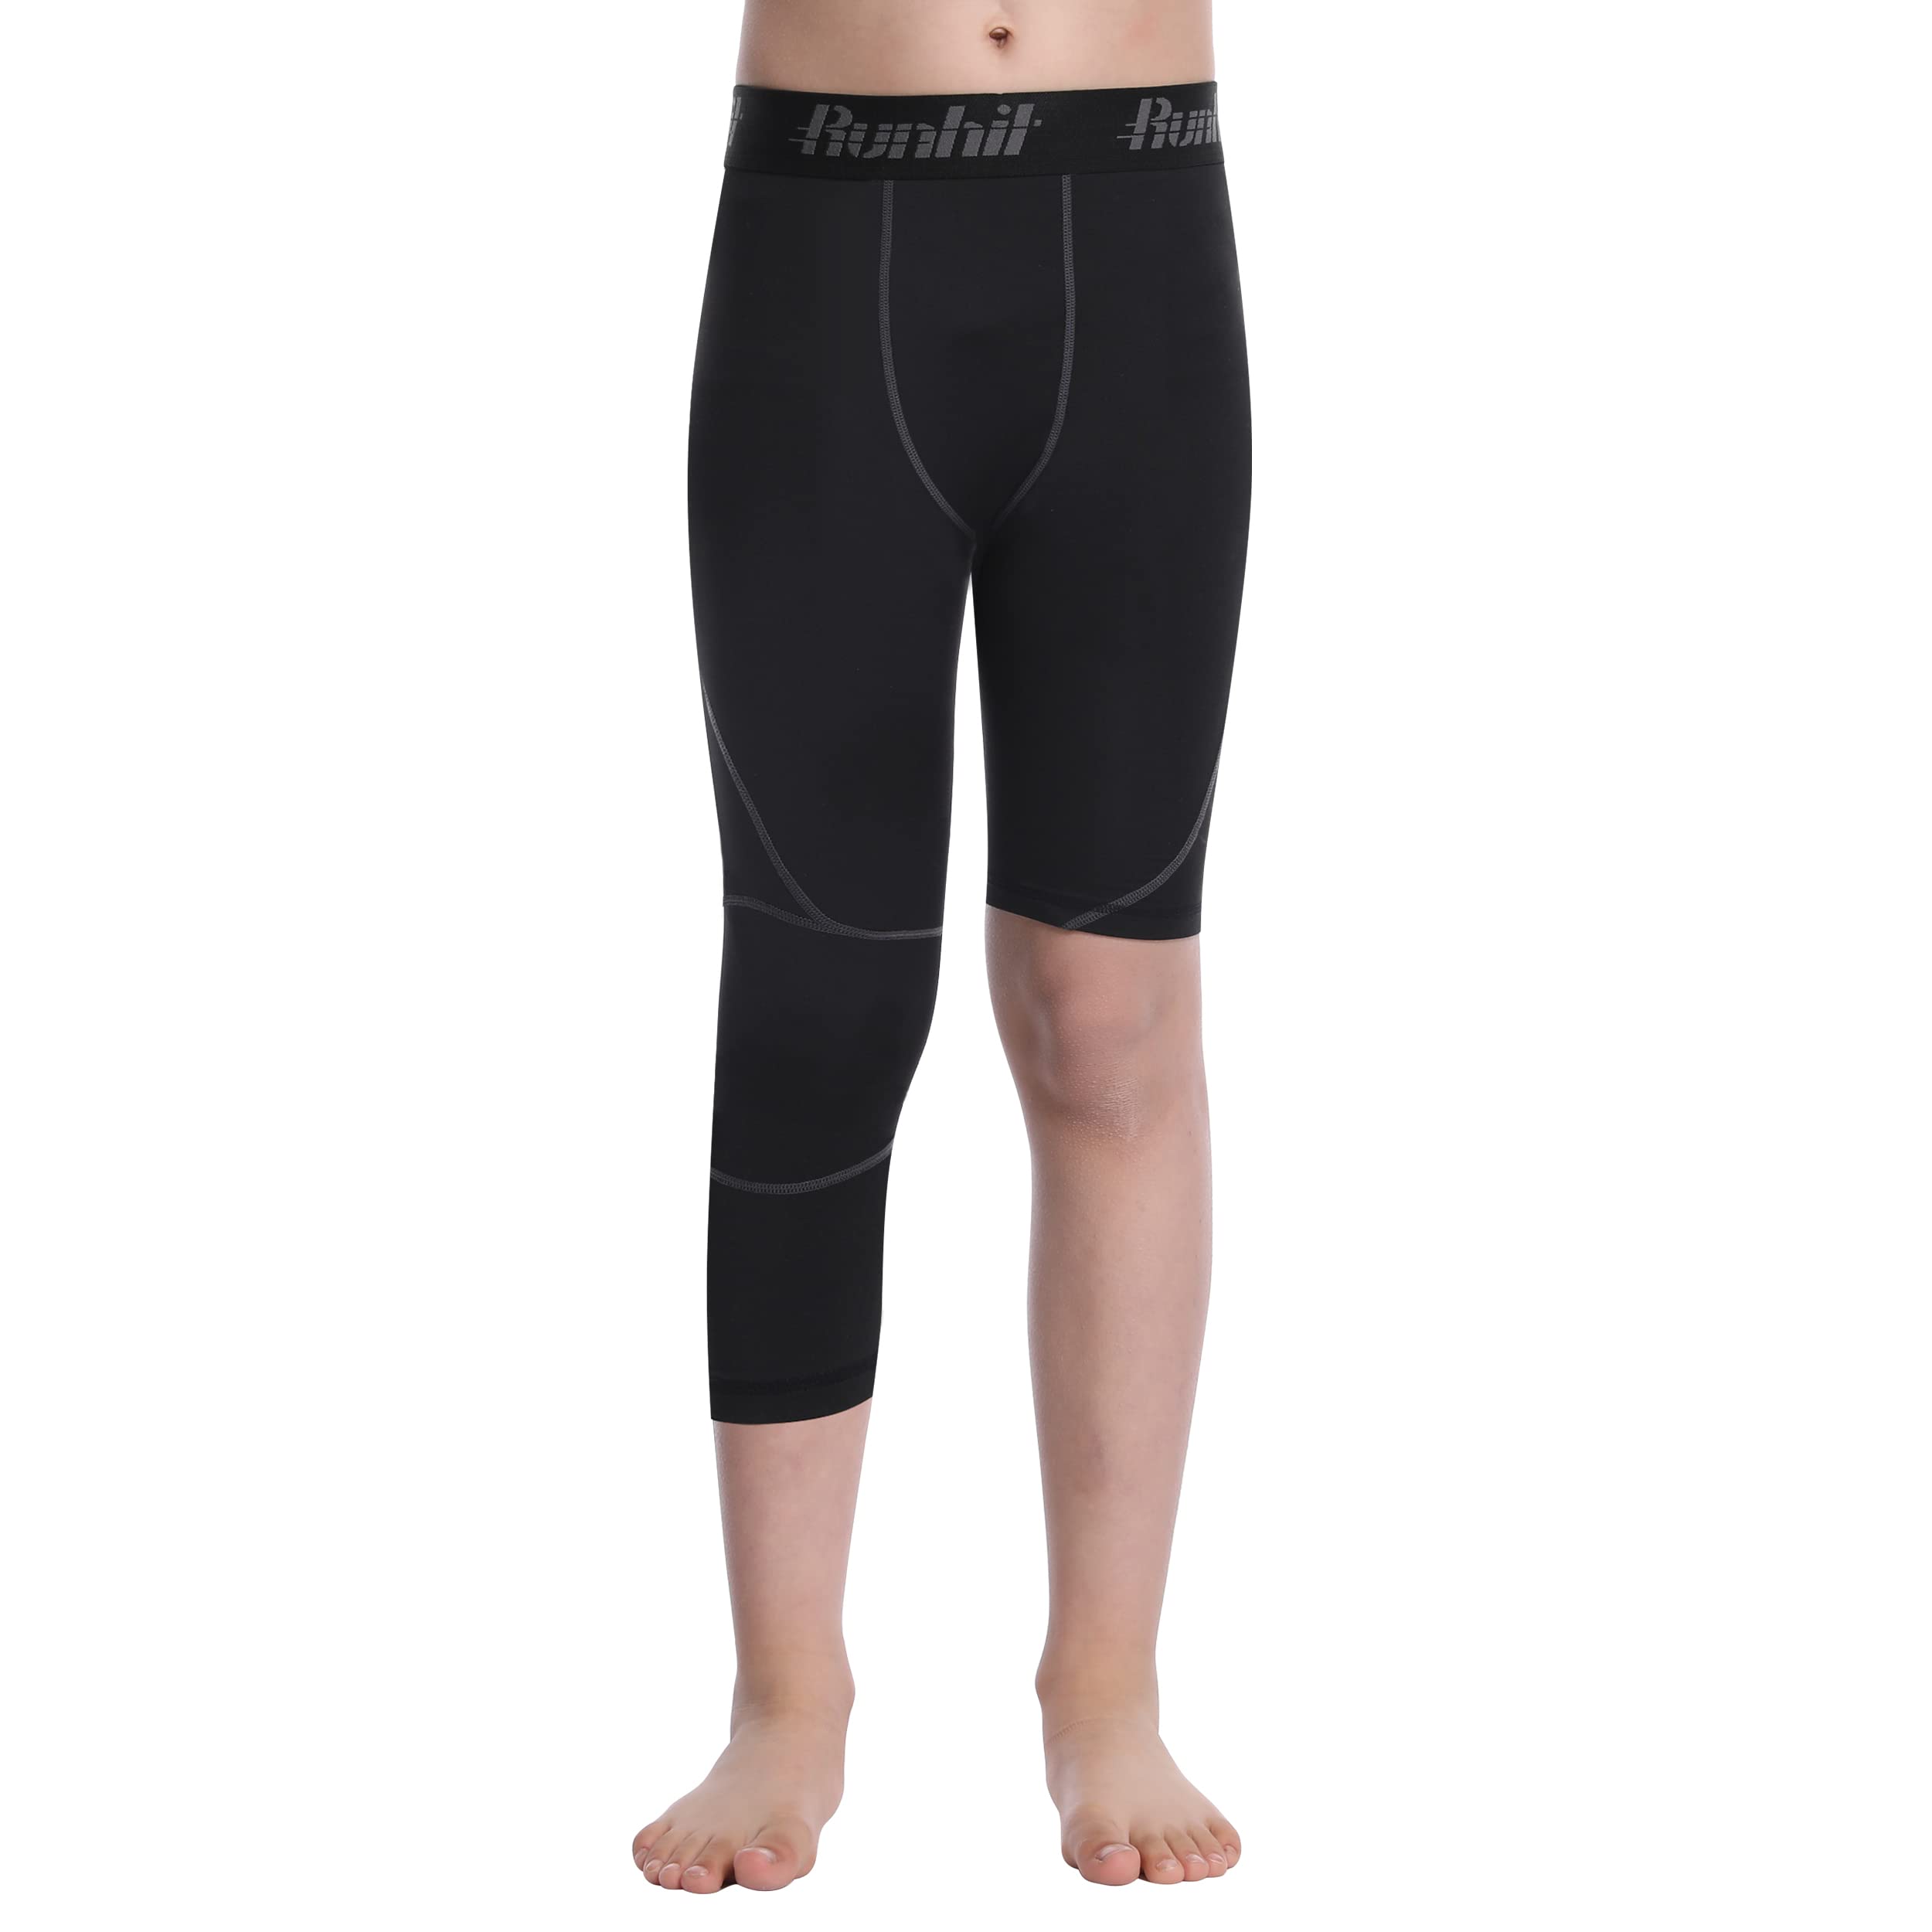 Runhit Boys Compression Leggings,Athletic Tights India